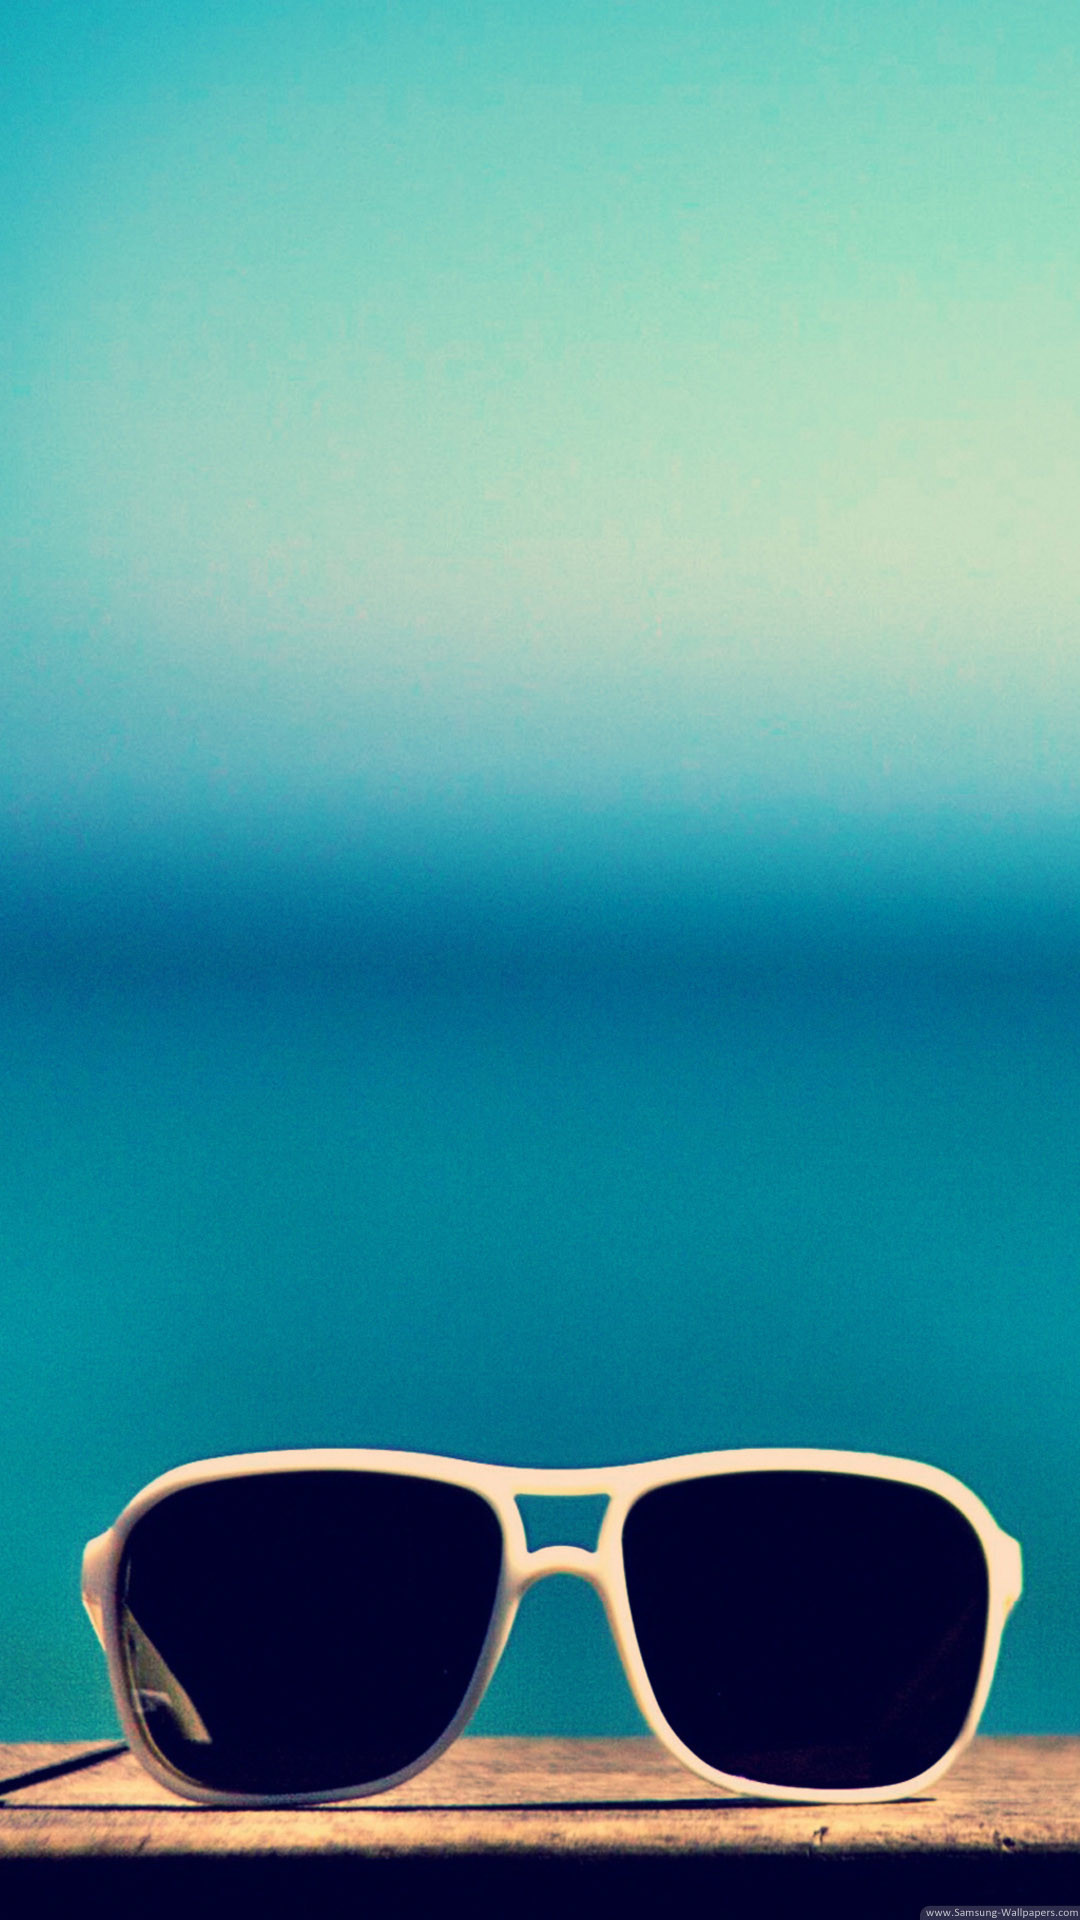 Hipster iphone wallpapers